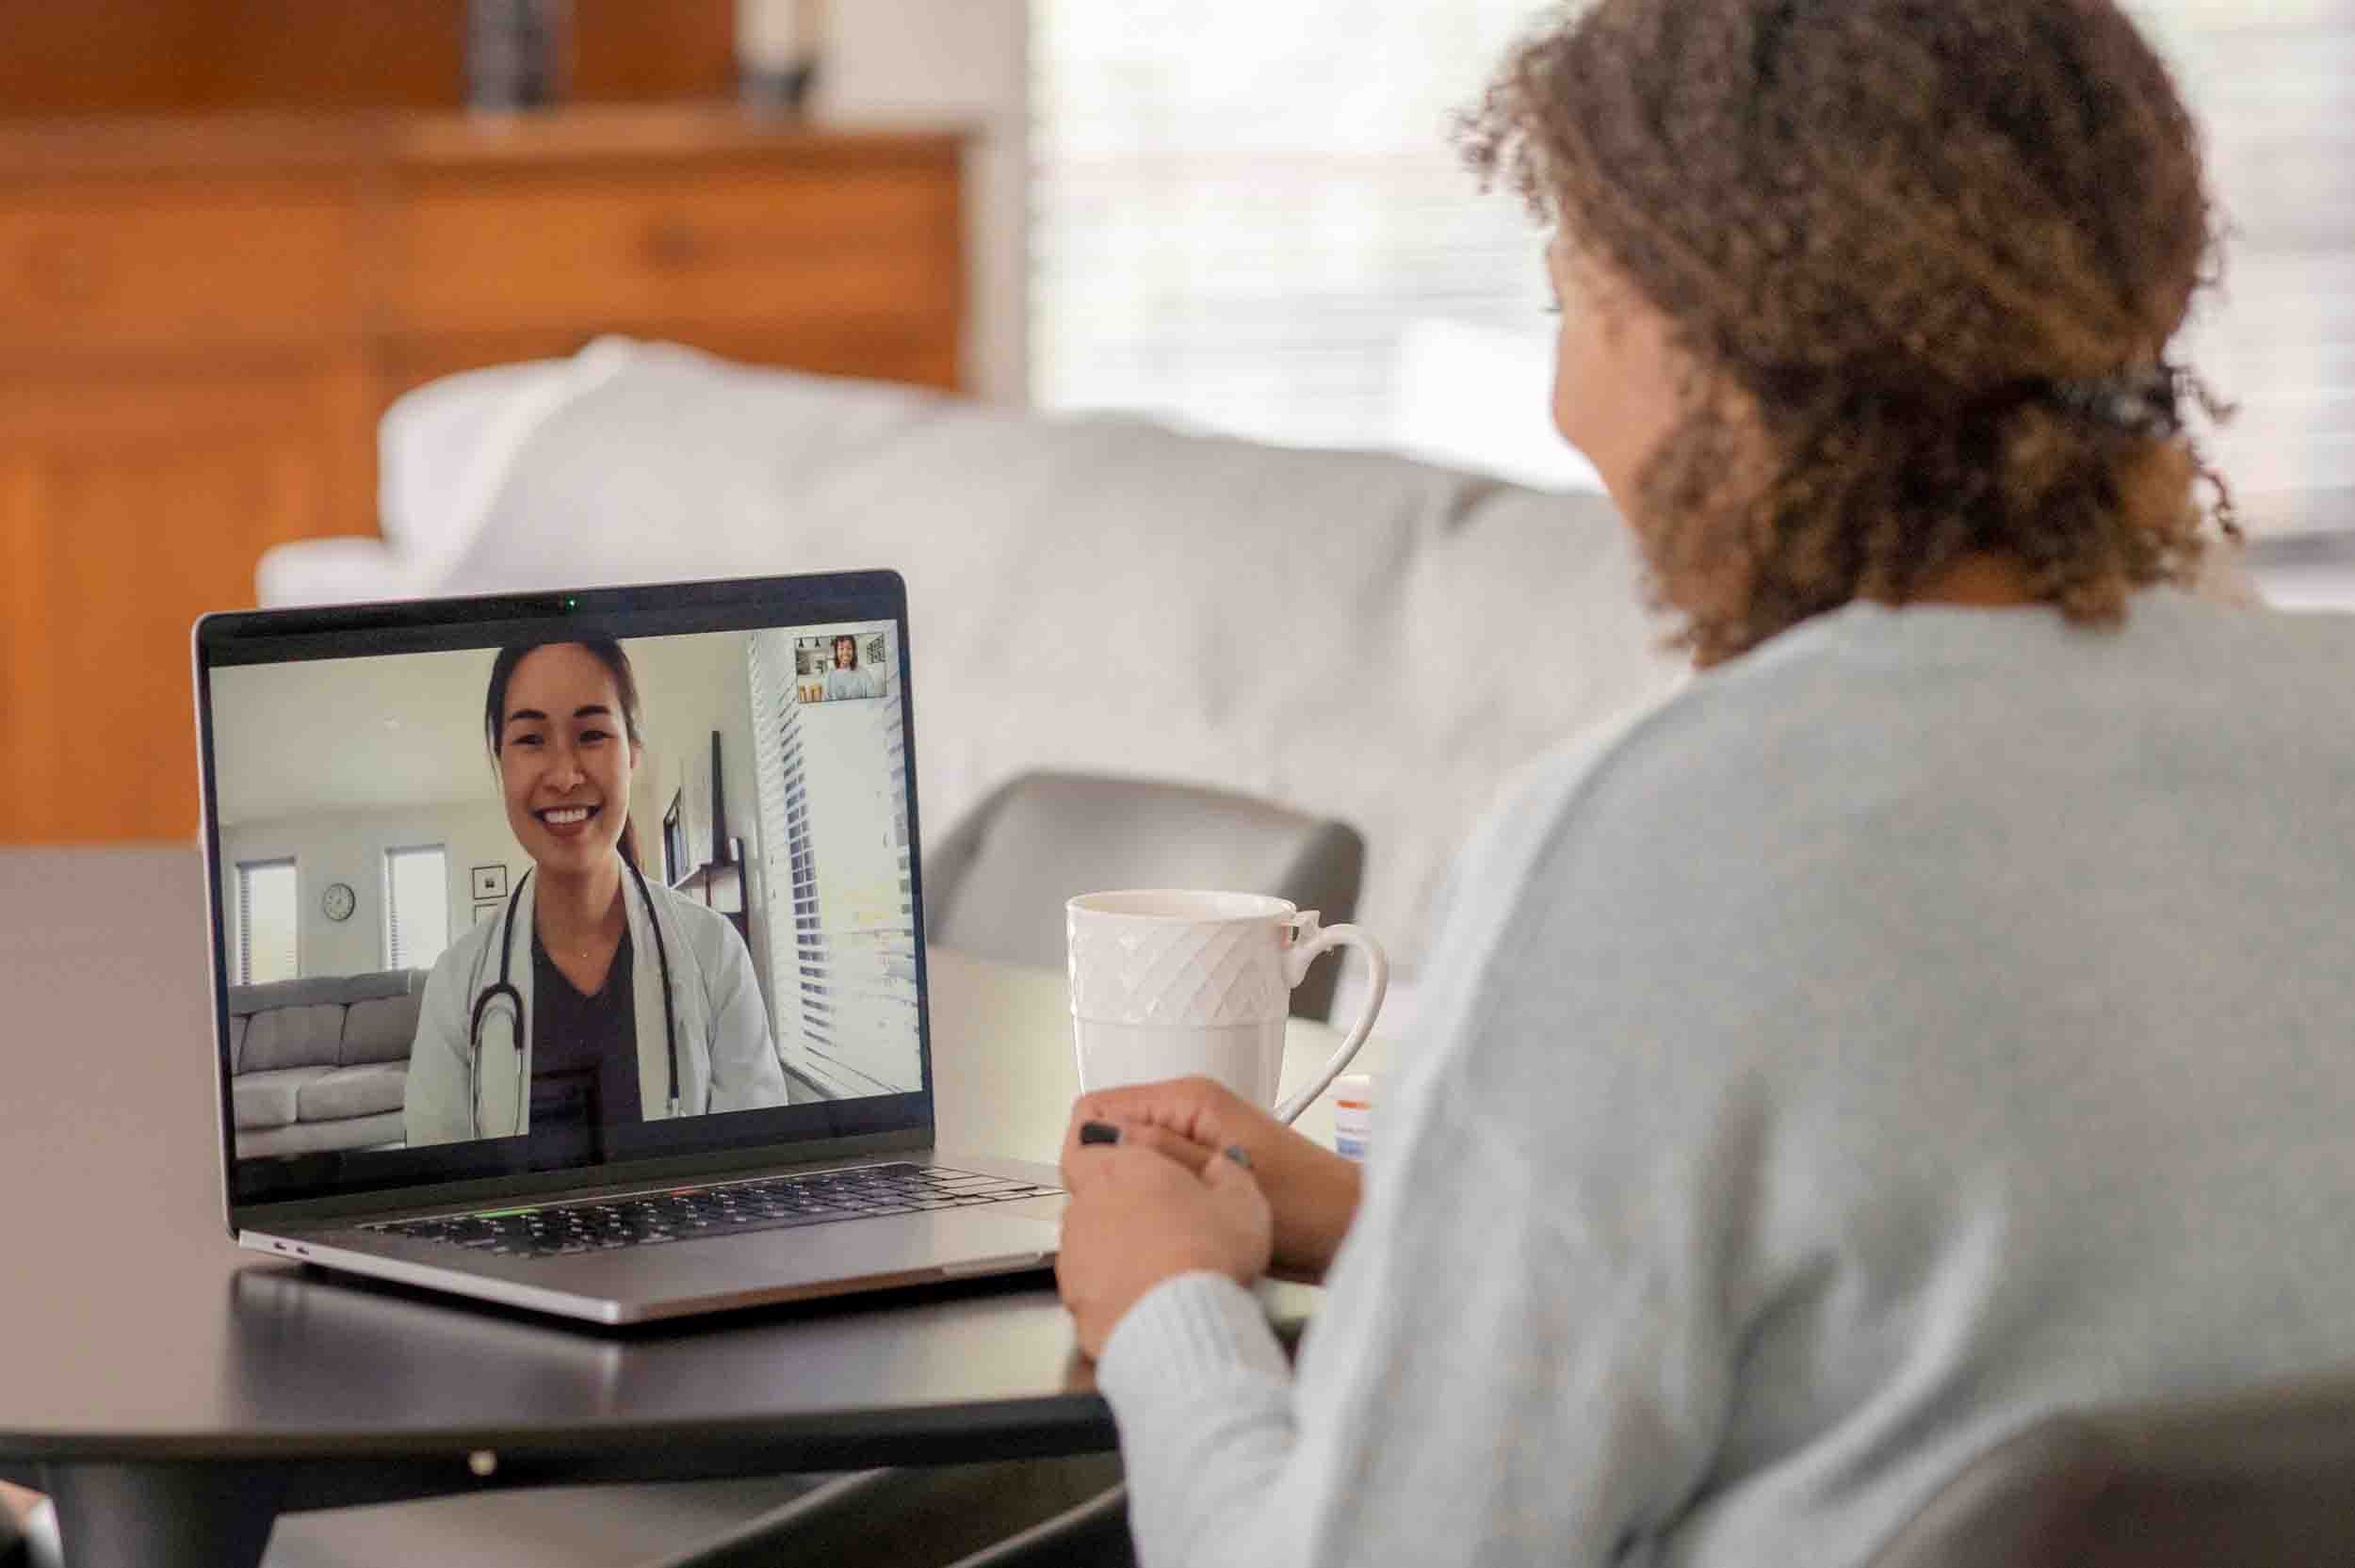 Genesis Lifestyle Medicine Blog | Is Telehealth Covered by Insurance? What about Medicare or Medicaid?